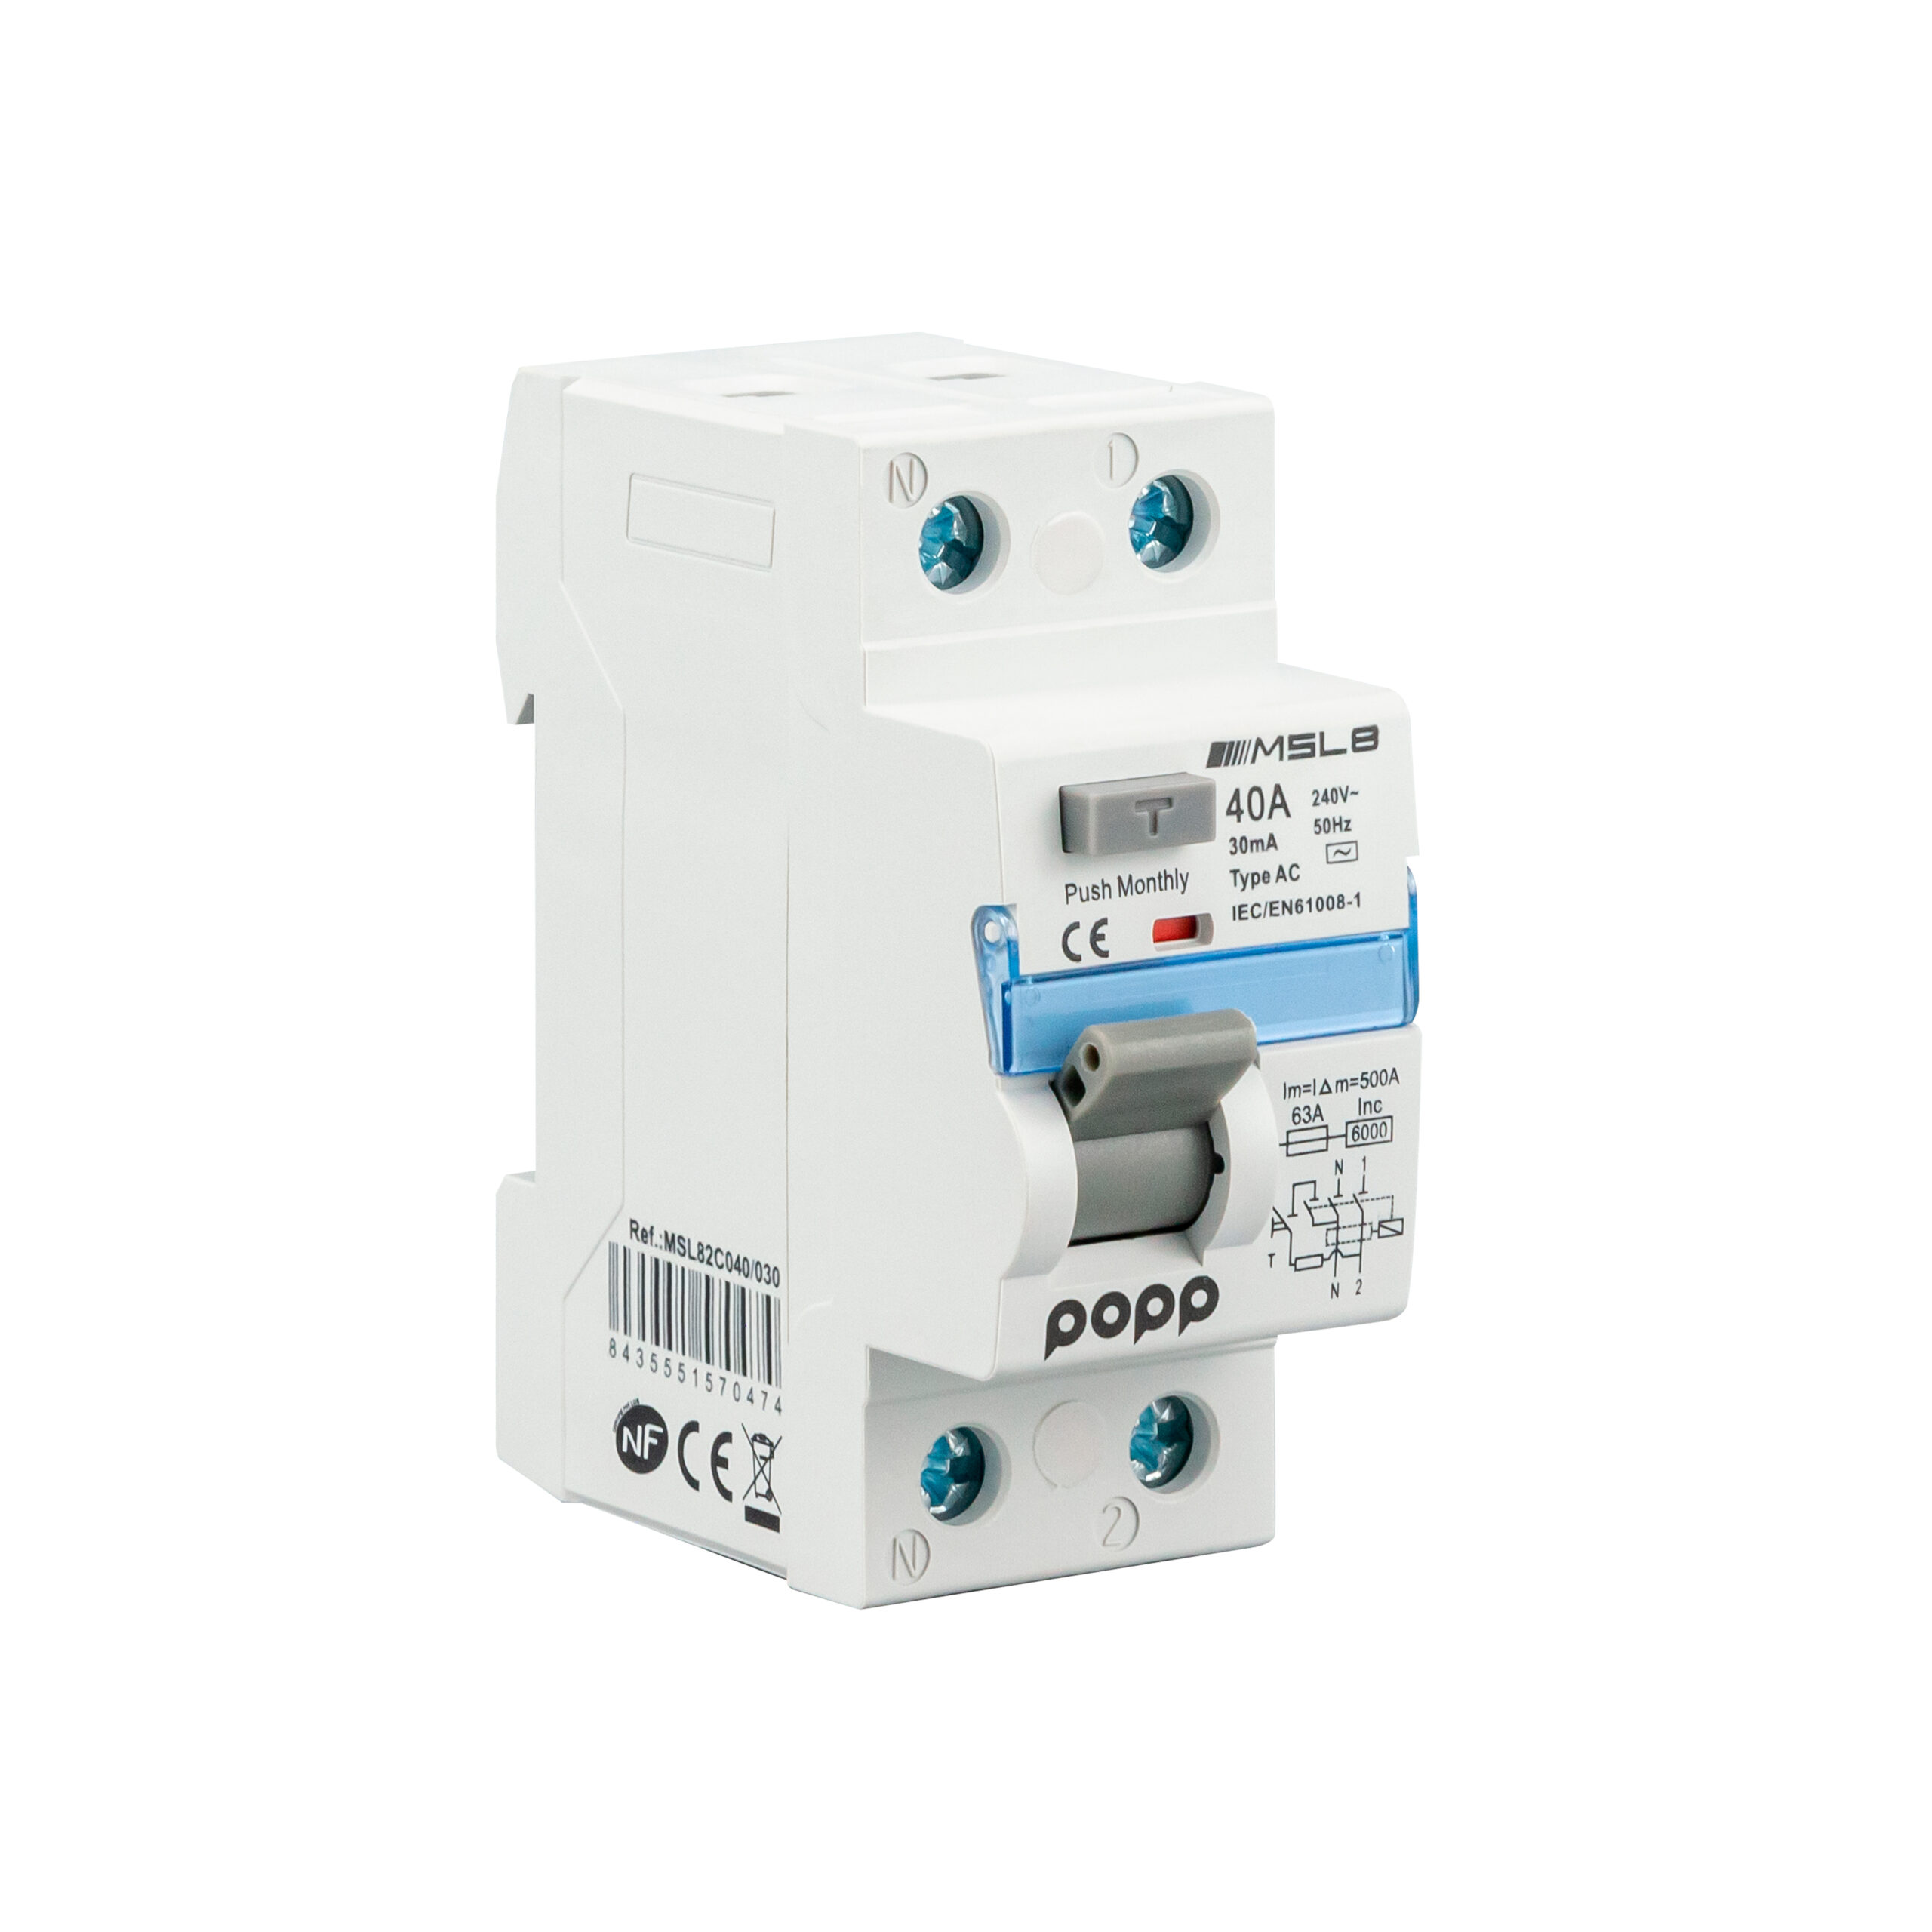 Interruptor 1P+N 40A 30mA diferencial serie MSL8 gama industrial